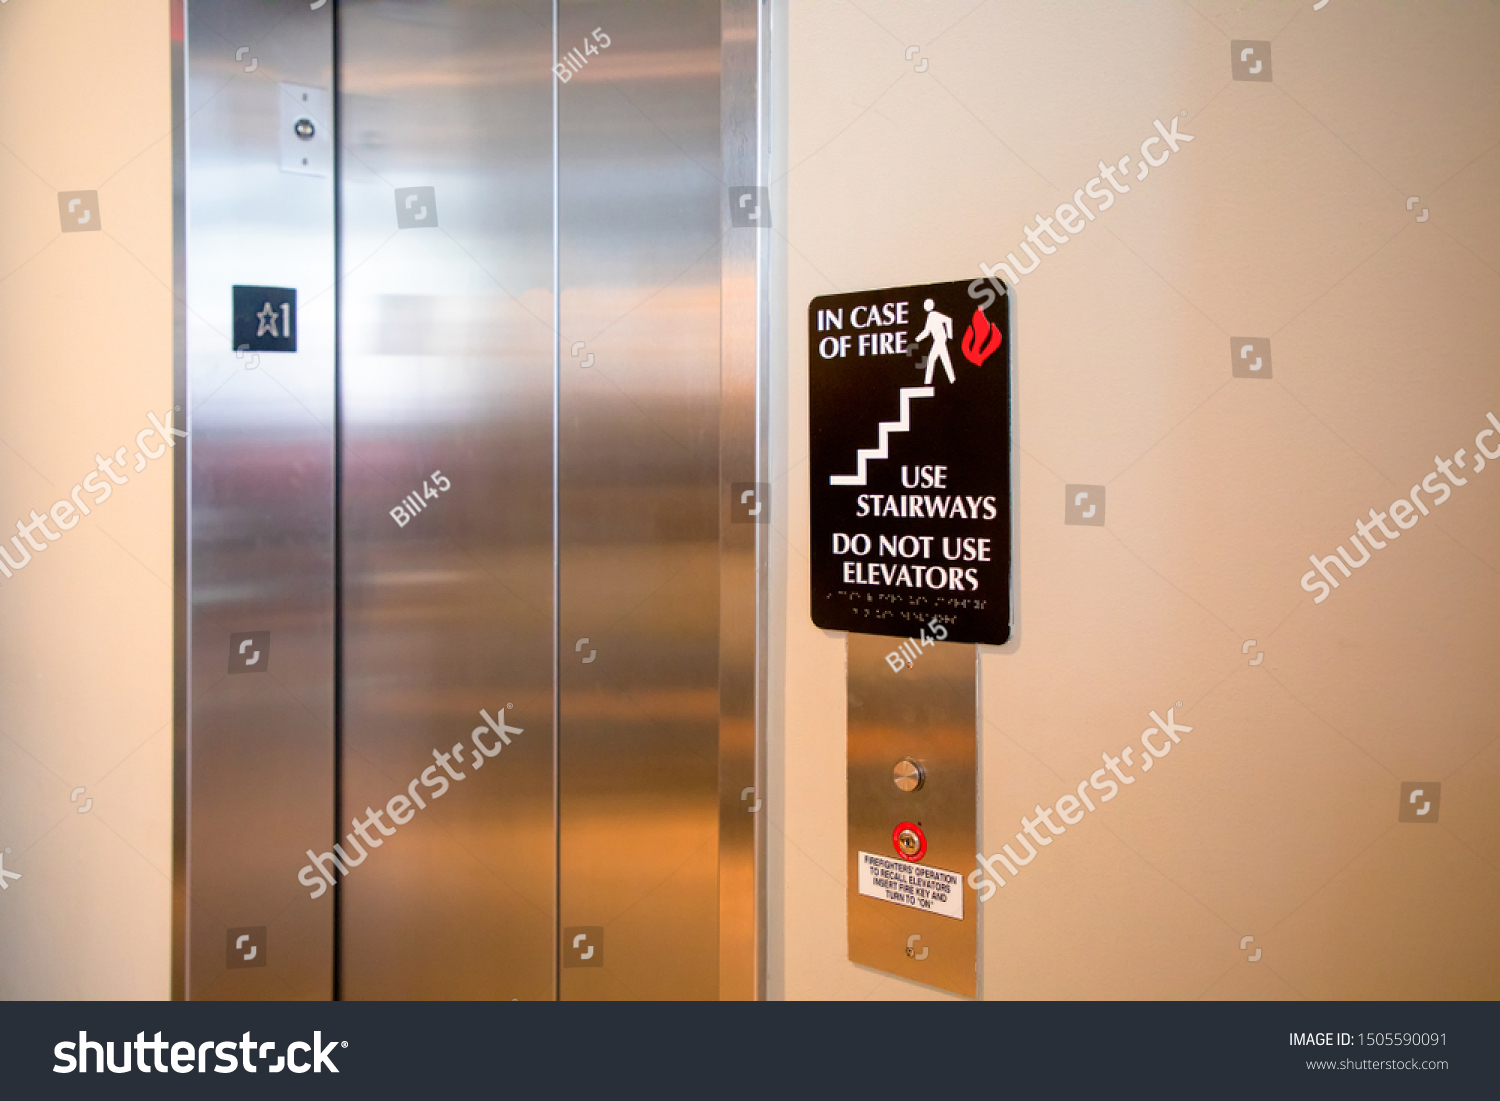 Do not use elevator in case of fire sign beside the elevator. safety concept. #1505590091